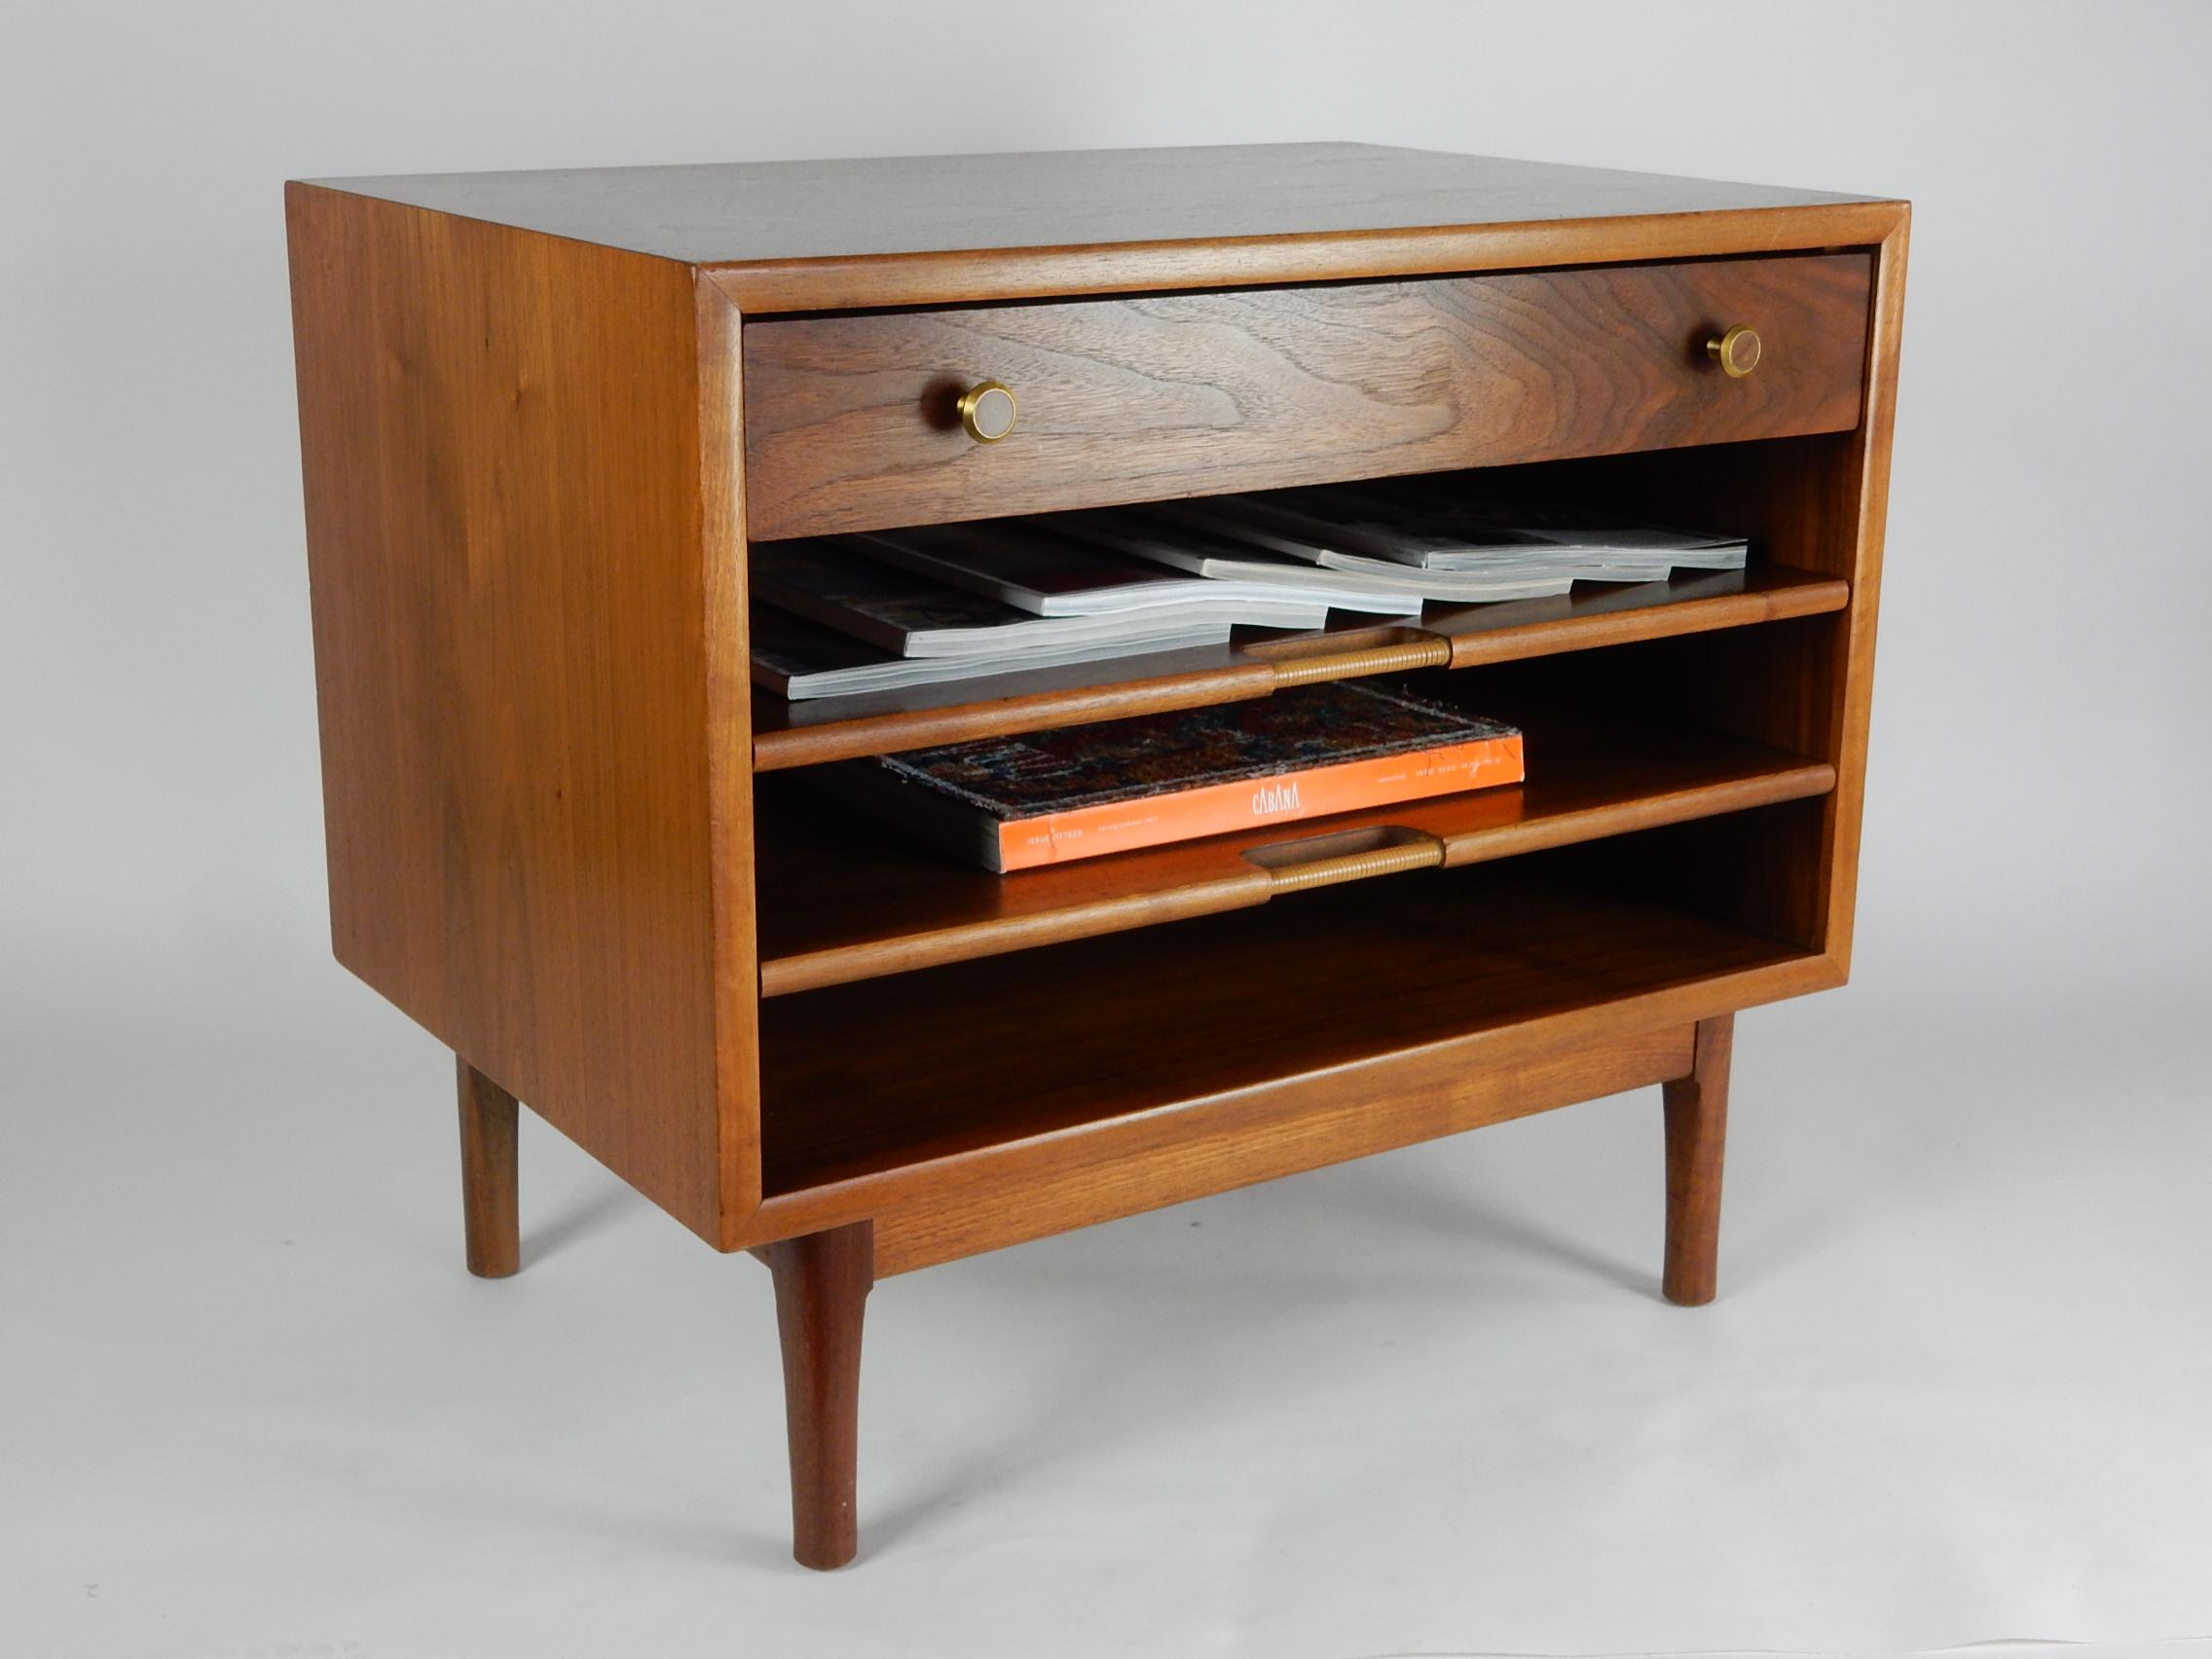 Exceptional walnut magazine table by Kipp Stewart and Stewart MacDougall for Drexel Declaration, circa 1960's.
Single top drawer and two pull out shelves with rattan-wrapped pulls
to display your favorite magazine selections.
Each shelf holds 8-10